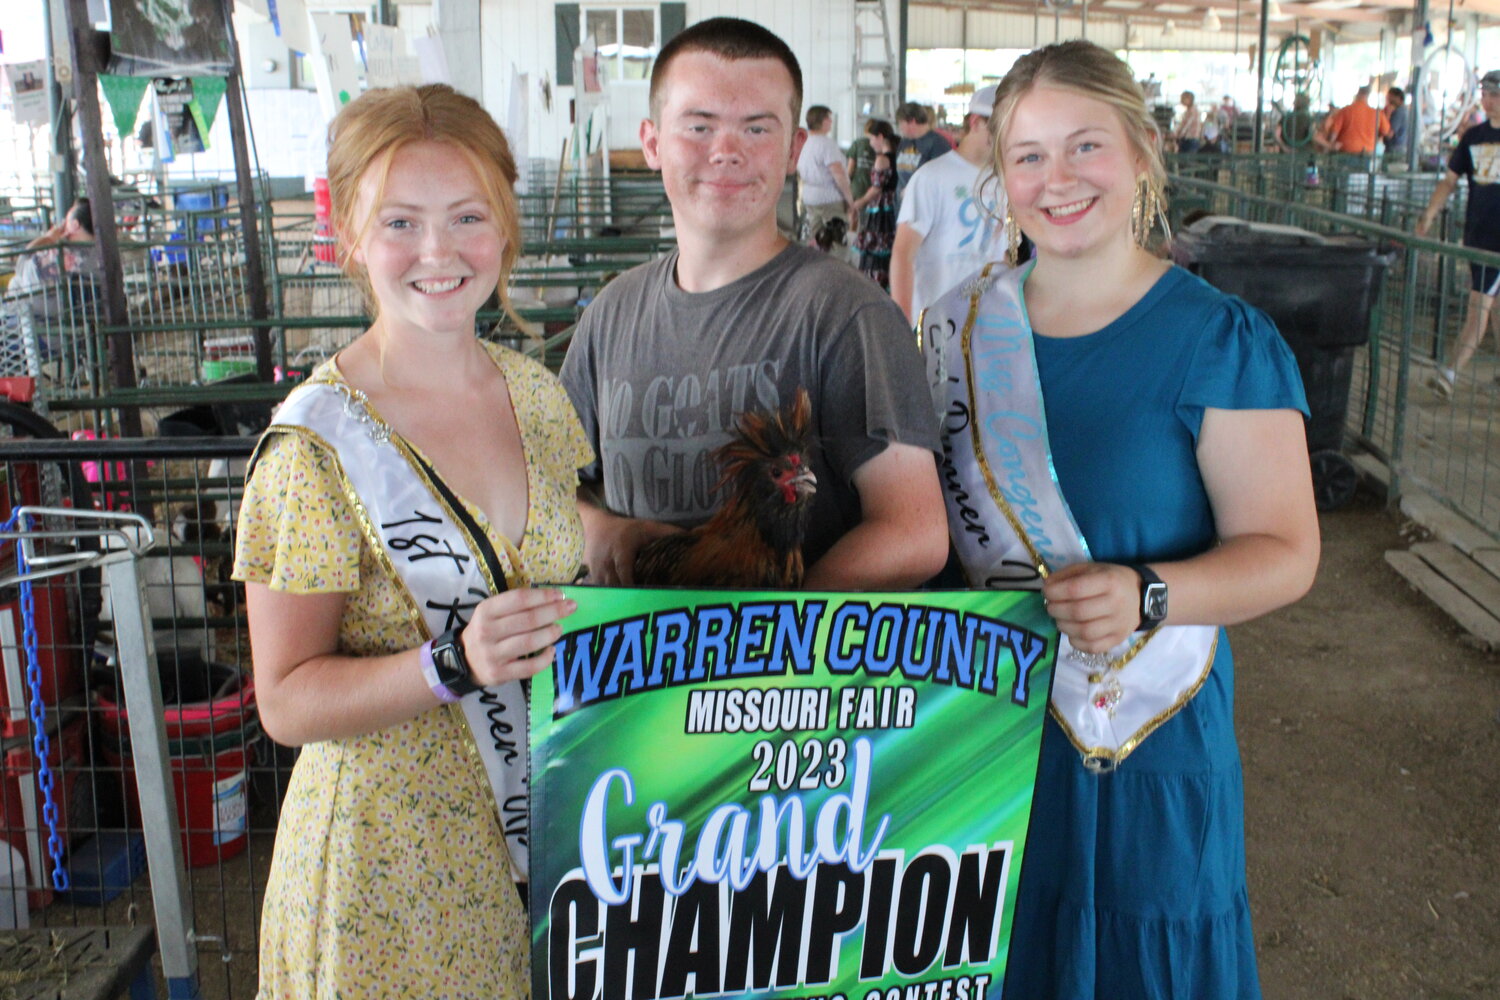 Rhett Karrenbrock, center, poses with Allison Duncan and Grace Schlansker after winning the rooster crowing competition on July 7 at the Warren County Fair.